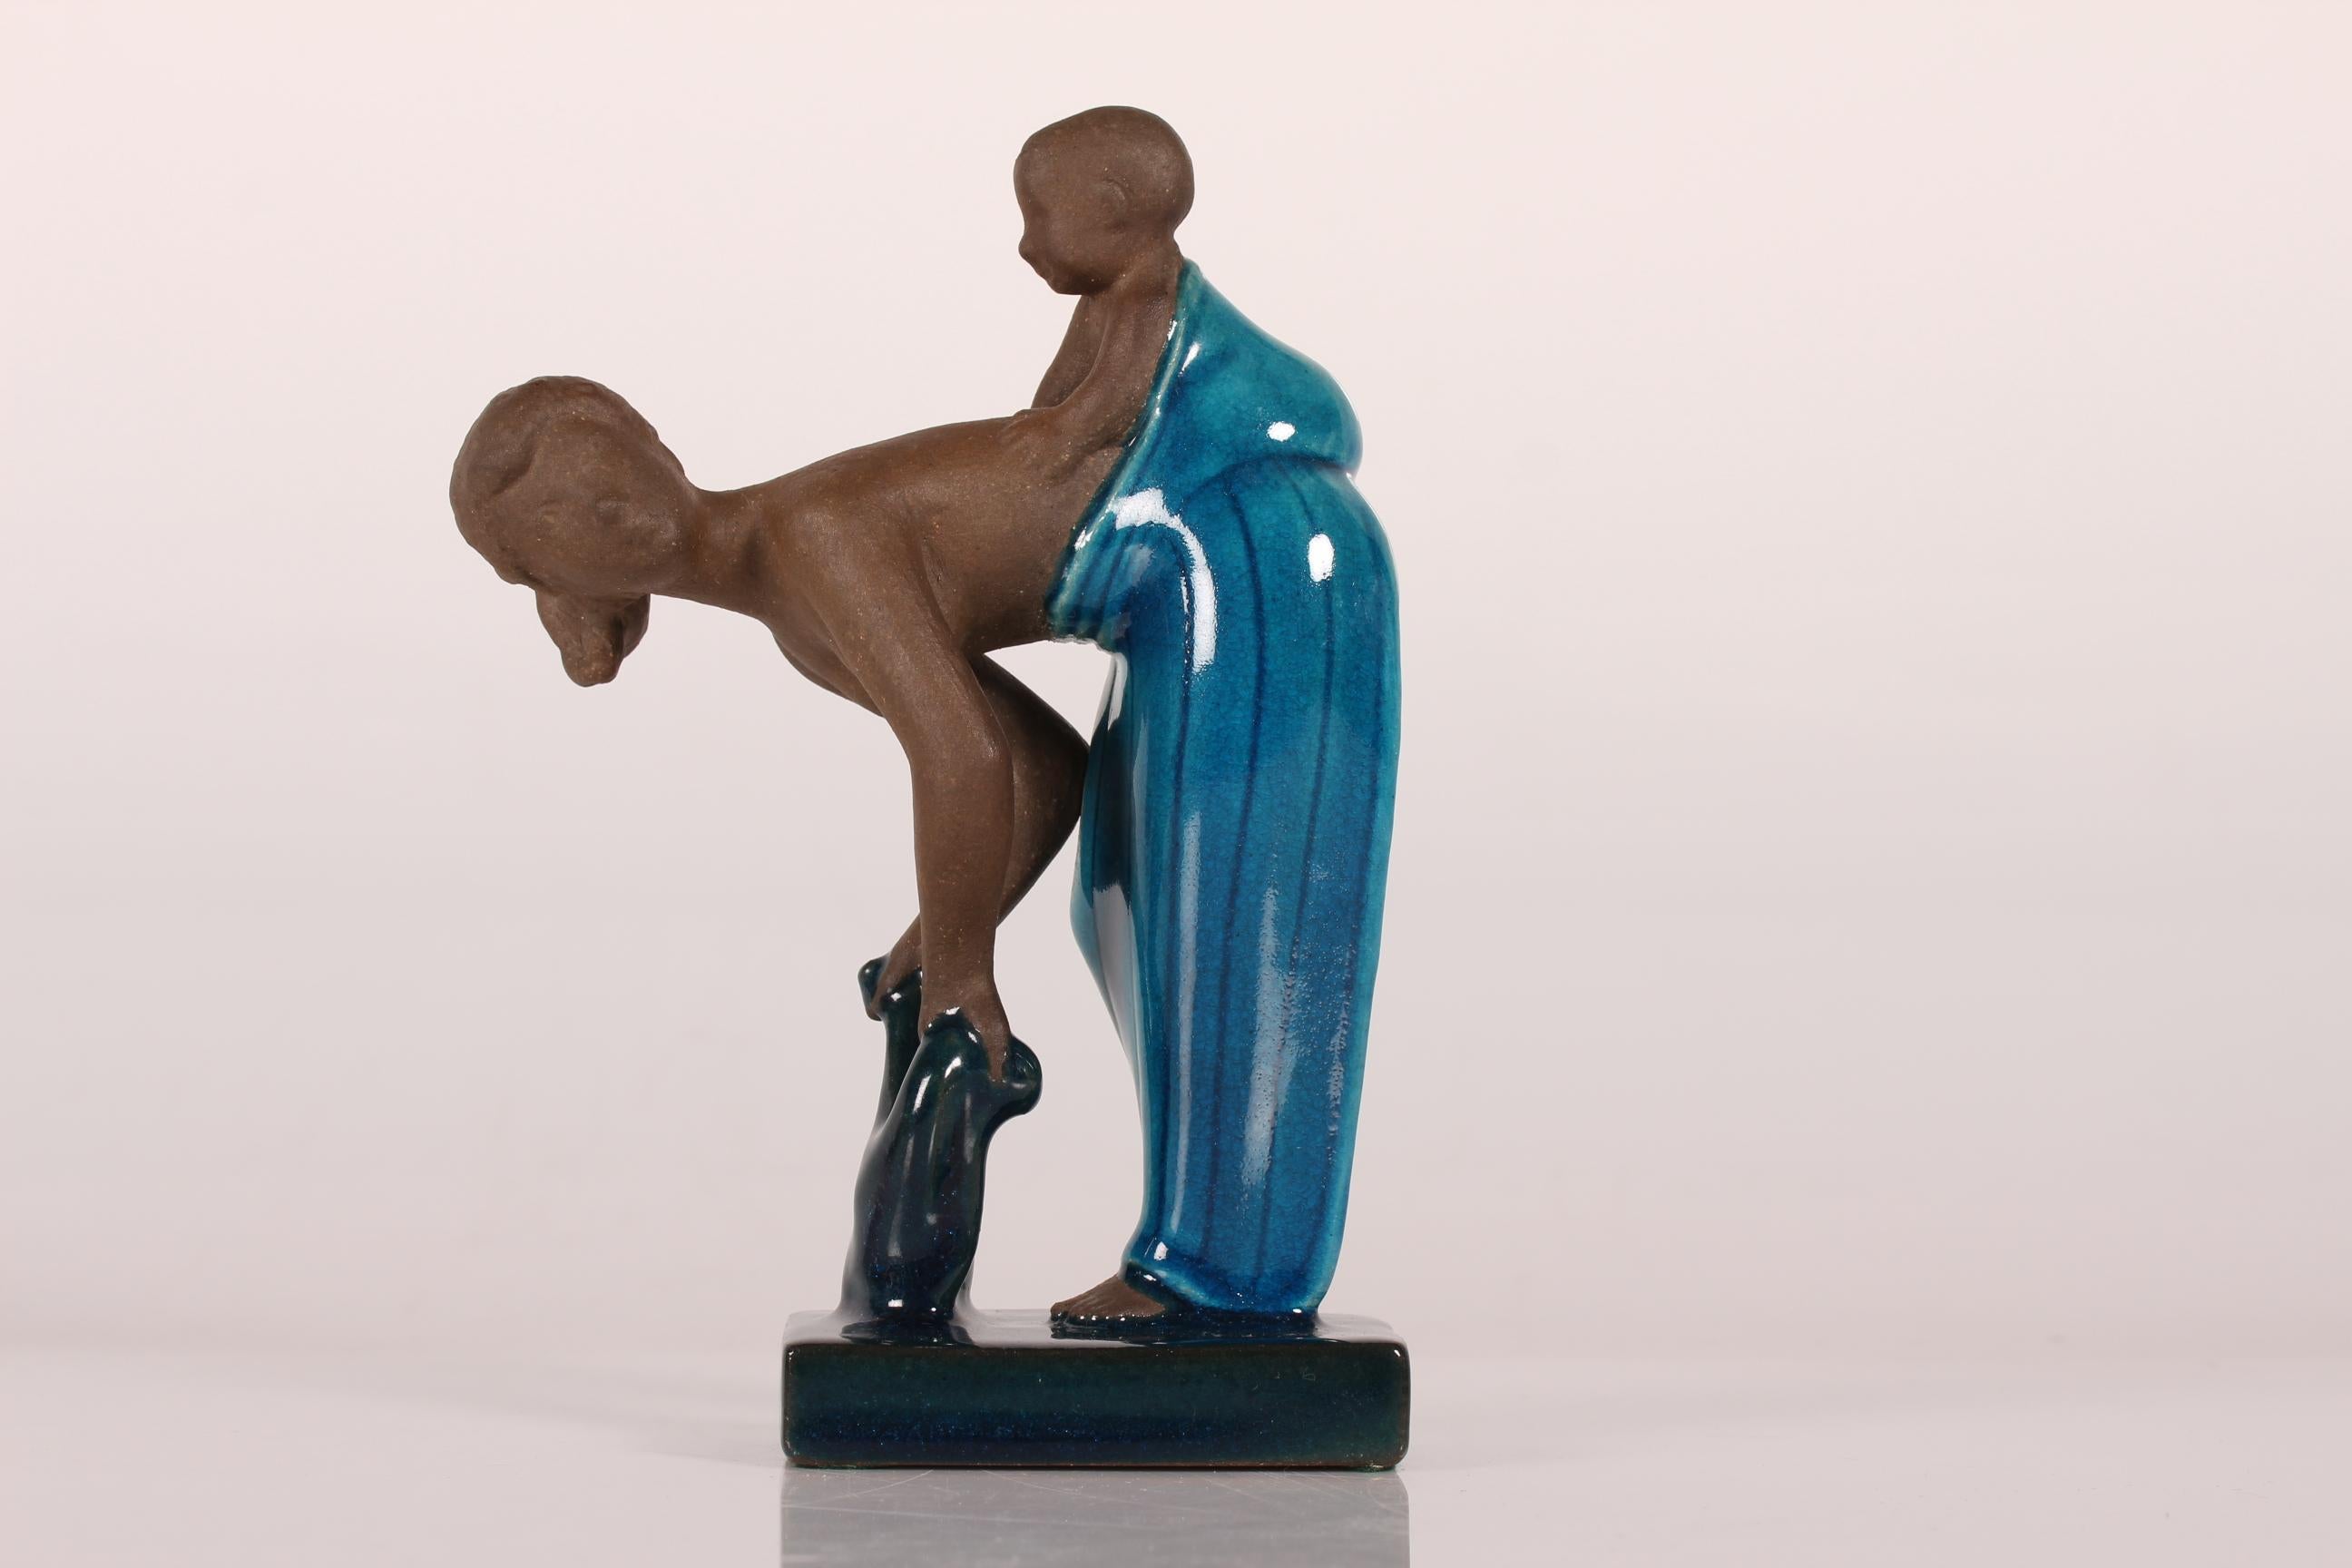 Stoneware figurine of a young woman with her child model no. 21565 designed by Johannes Hedegaard and manufactured by Royal Copenhagen

This figurine is made in 1958 and partly decorated with dark blue glaze and signed Johannes Hedegaard + model